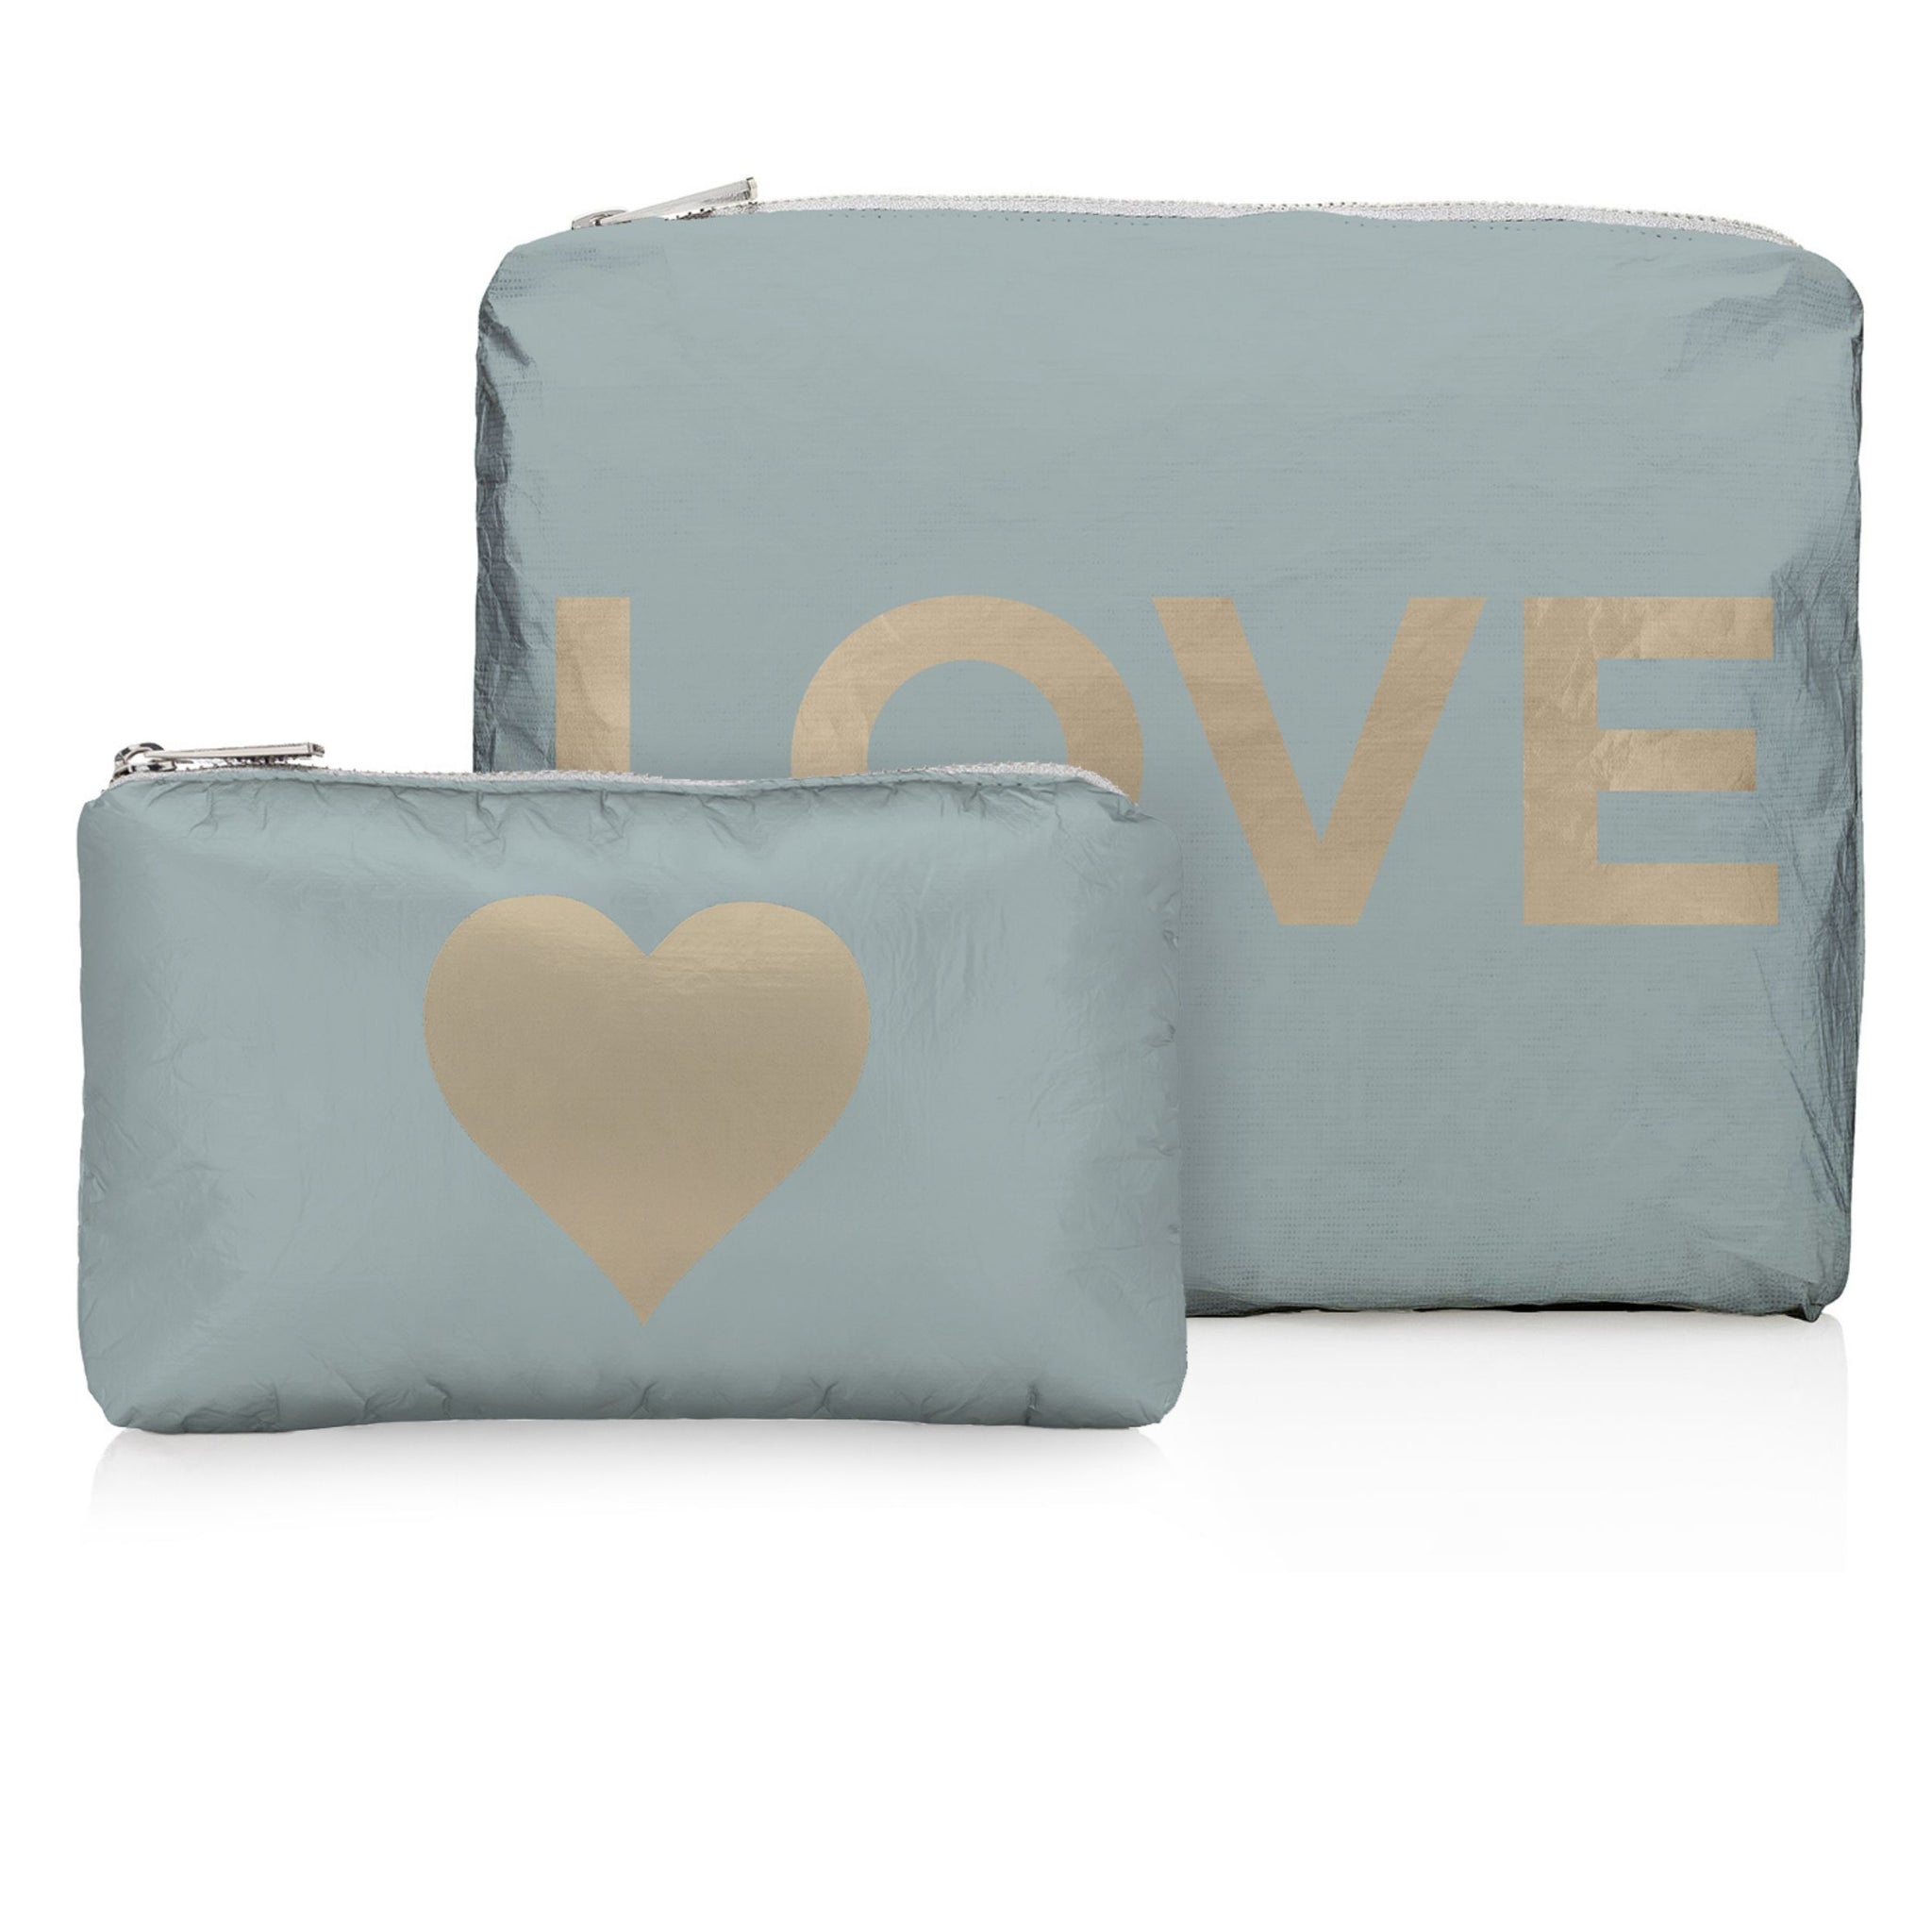 Set of Two - Organizational Packs - Shimmer Gray with Golden "LOVE" & Heart